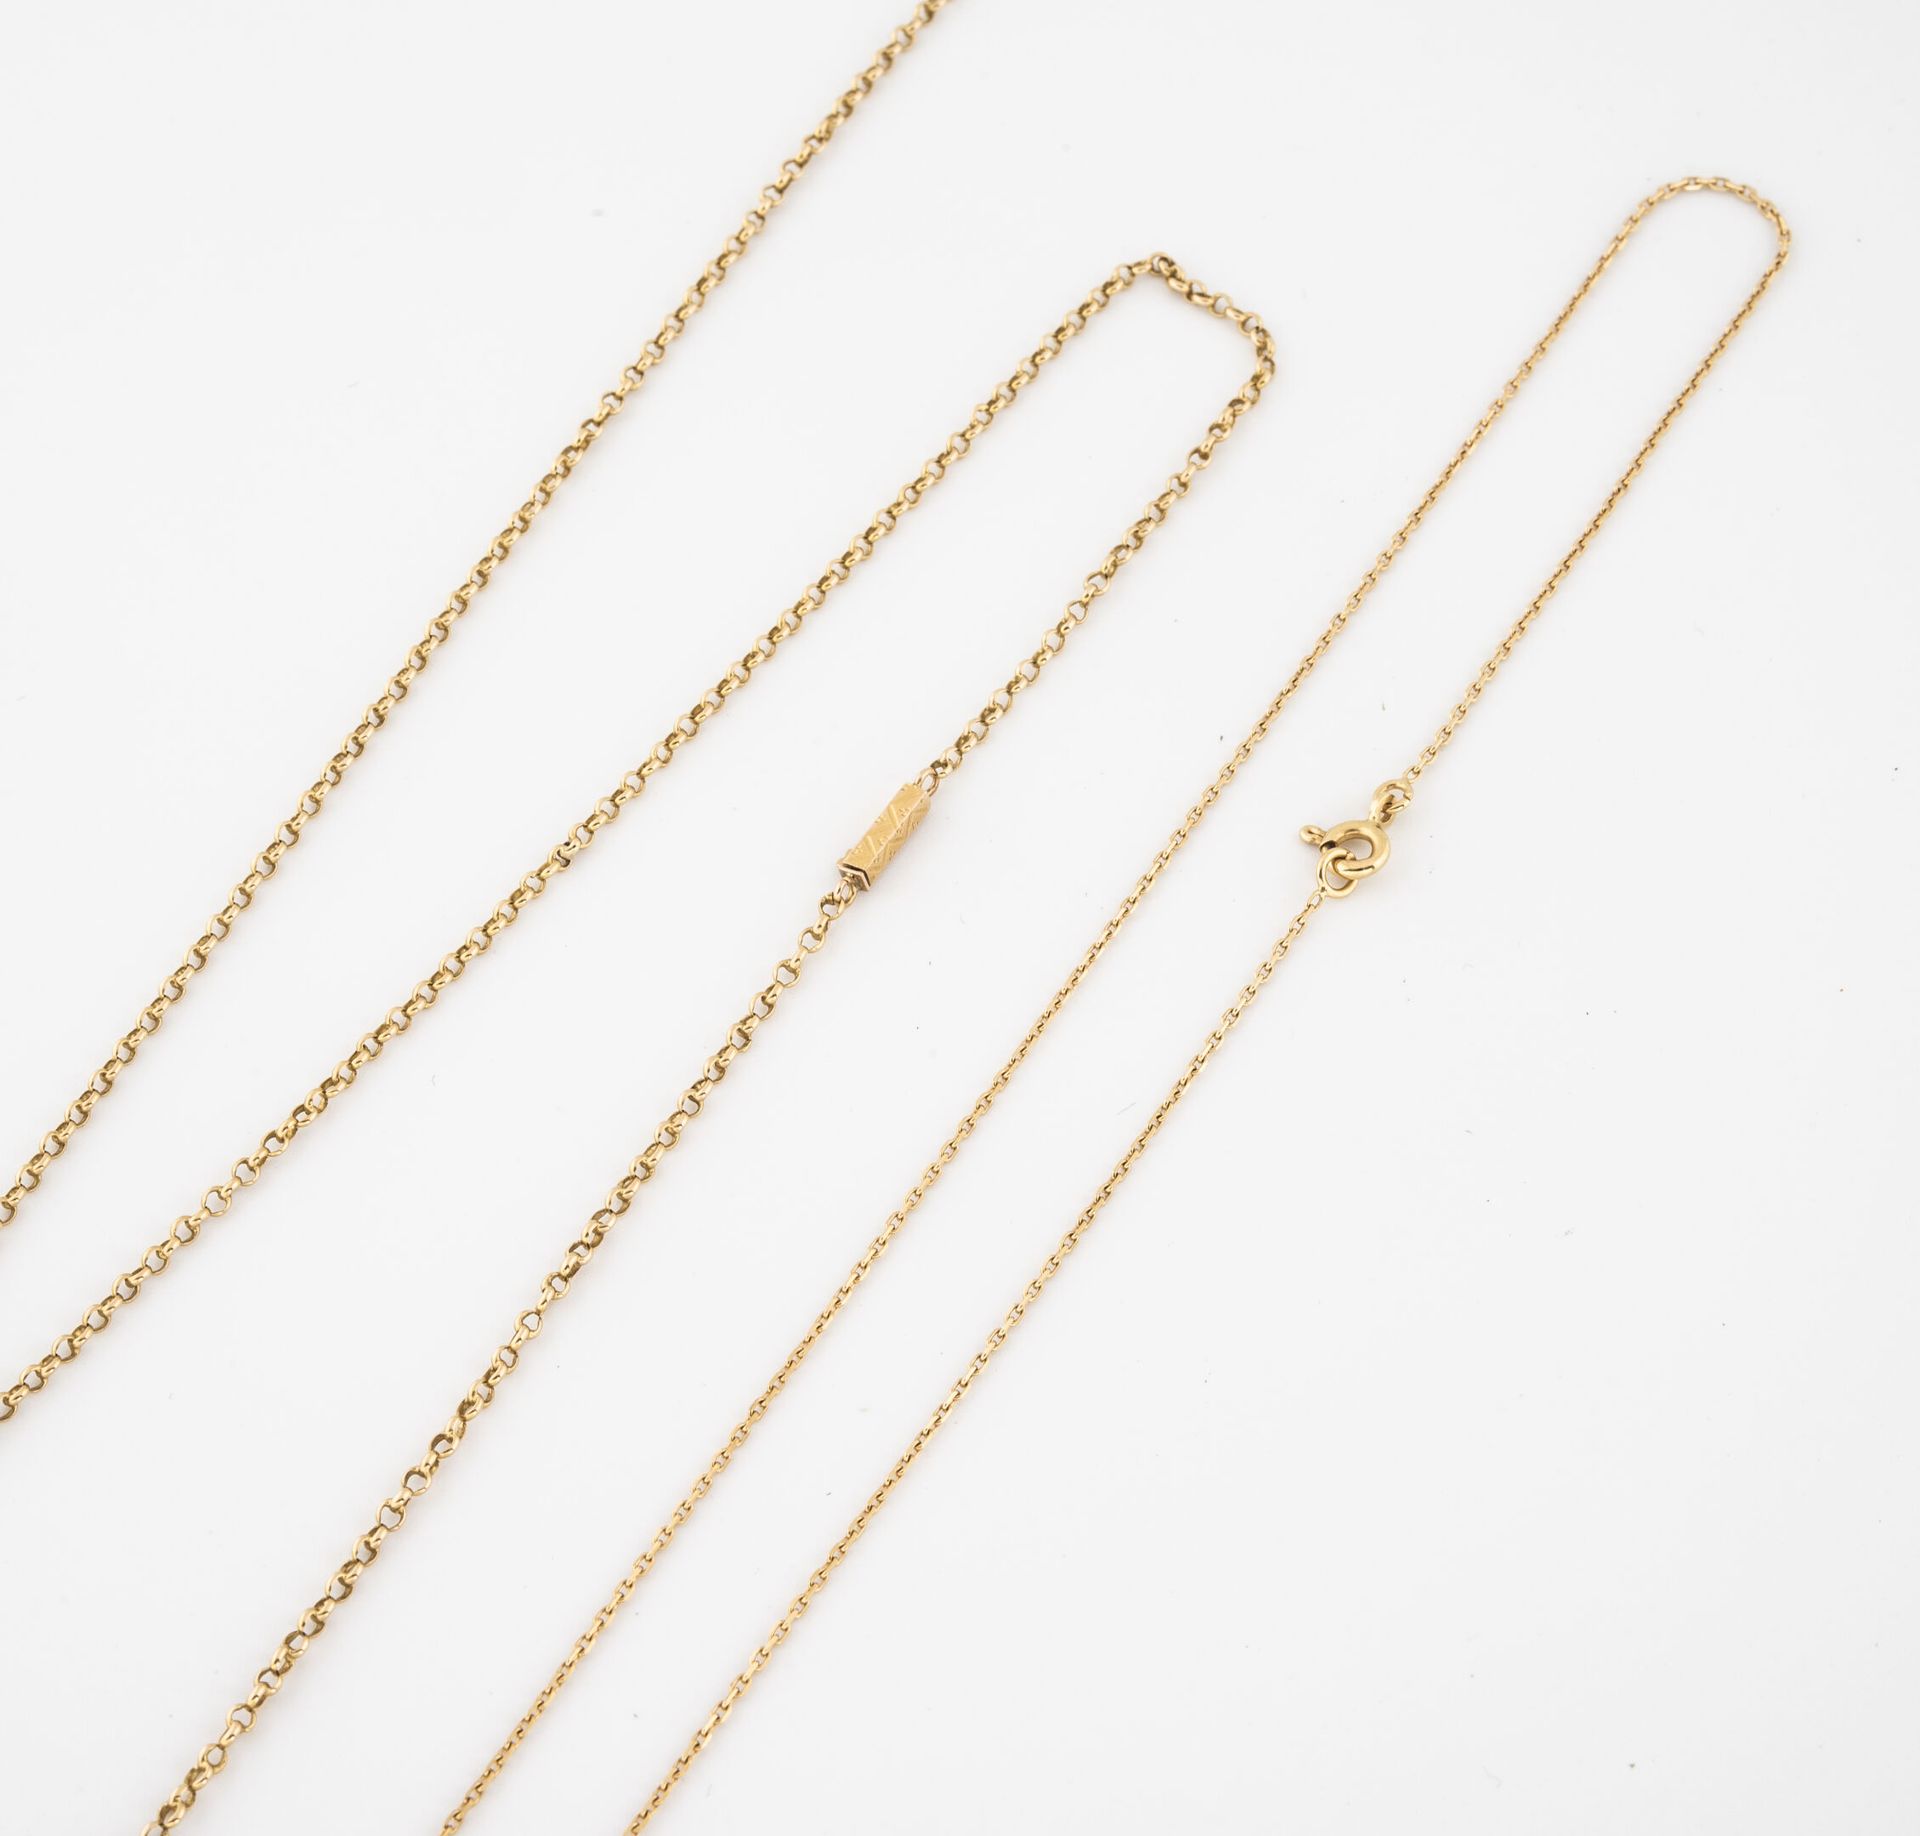 Null Yellow gold (750) necklace chain. 

Spring ring clasp.

- Length : 44 cm. 
&hellip;